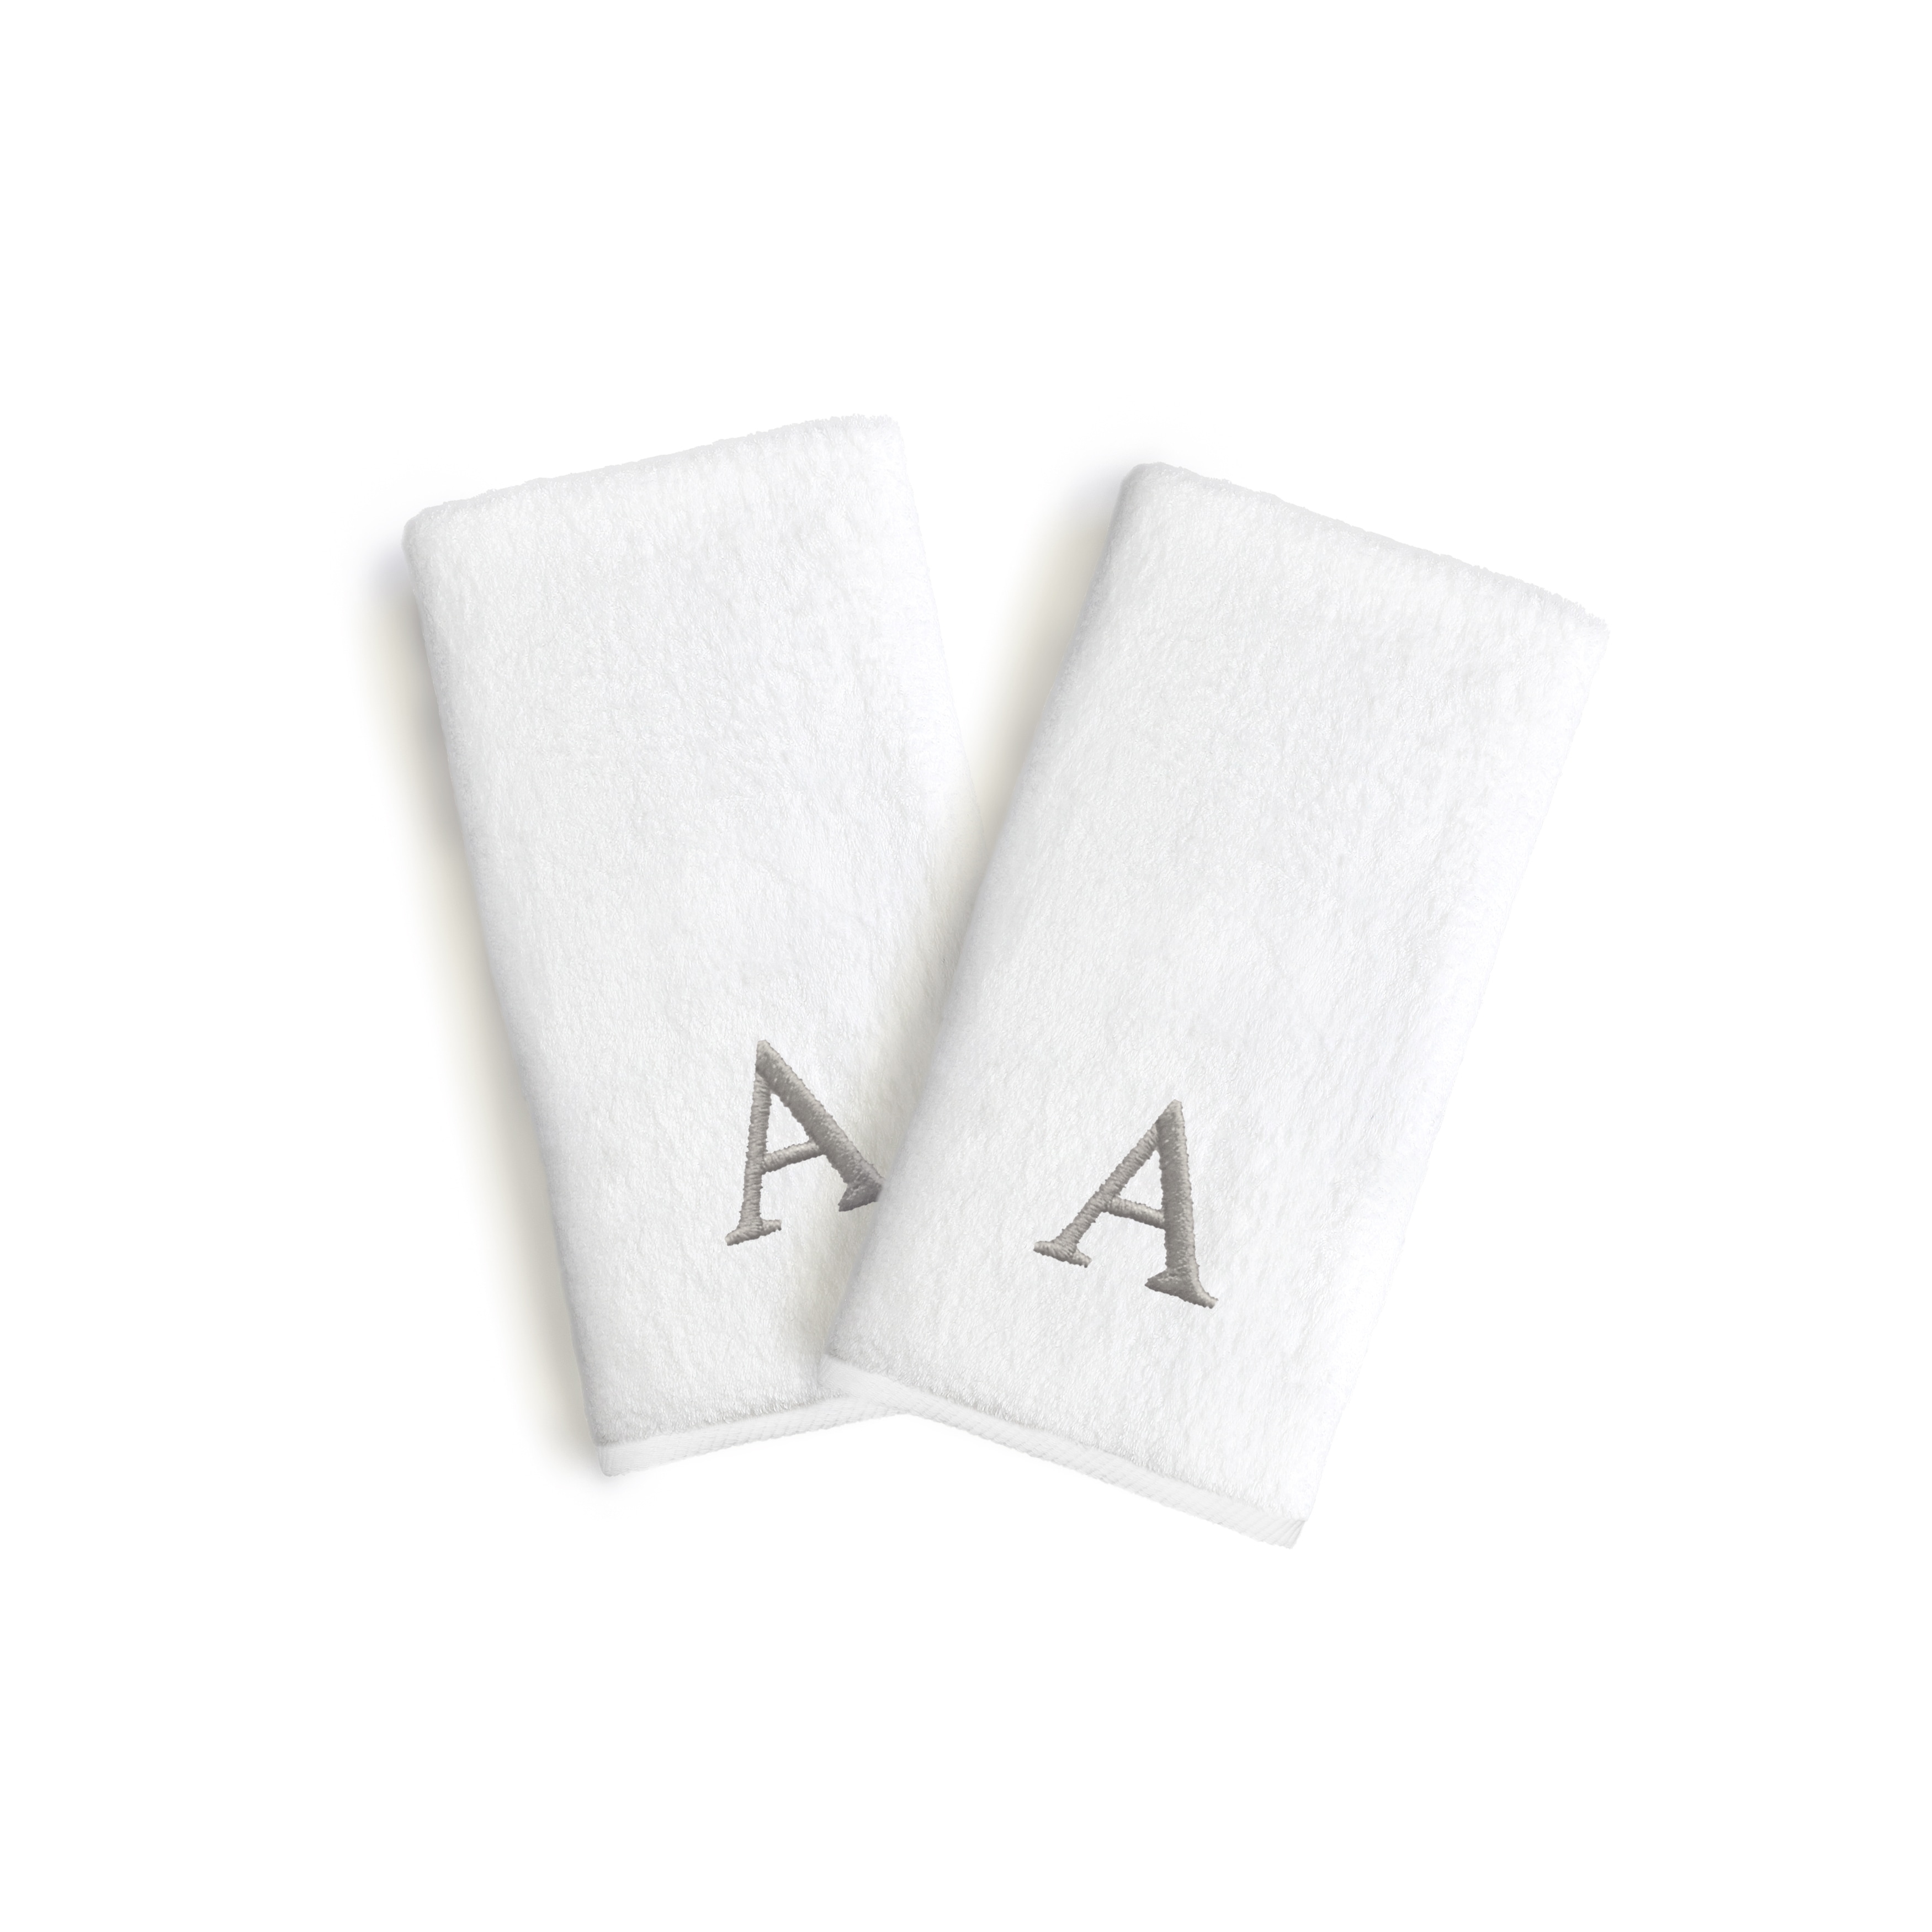 https://ak1.ostkcdn.com/images/products/12309271/Authentic-Hotel-and-Spa-2-piece-White-Turkish-Cotton-Hand-Towels-with-Grey-Block-Monogrammed-Initial-a988b129-3faf-46ce-b69c-fdf80518b3fb.jpg